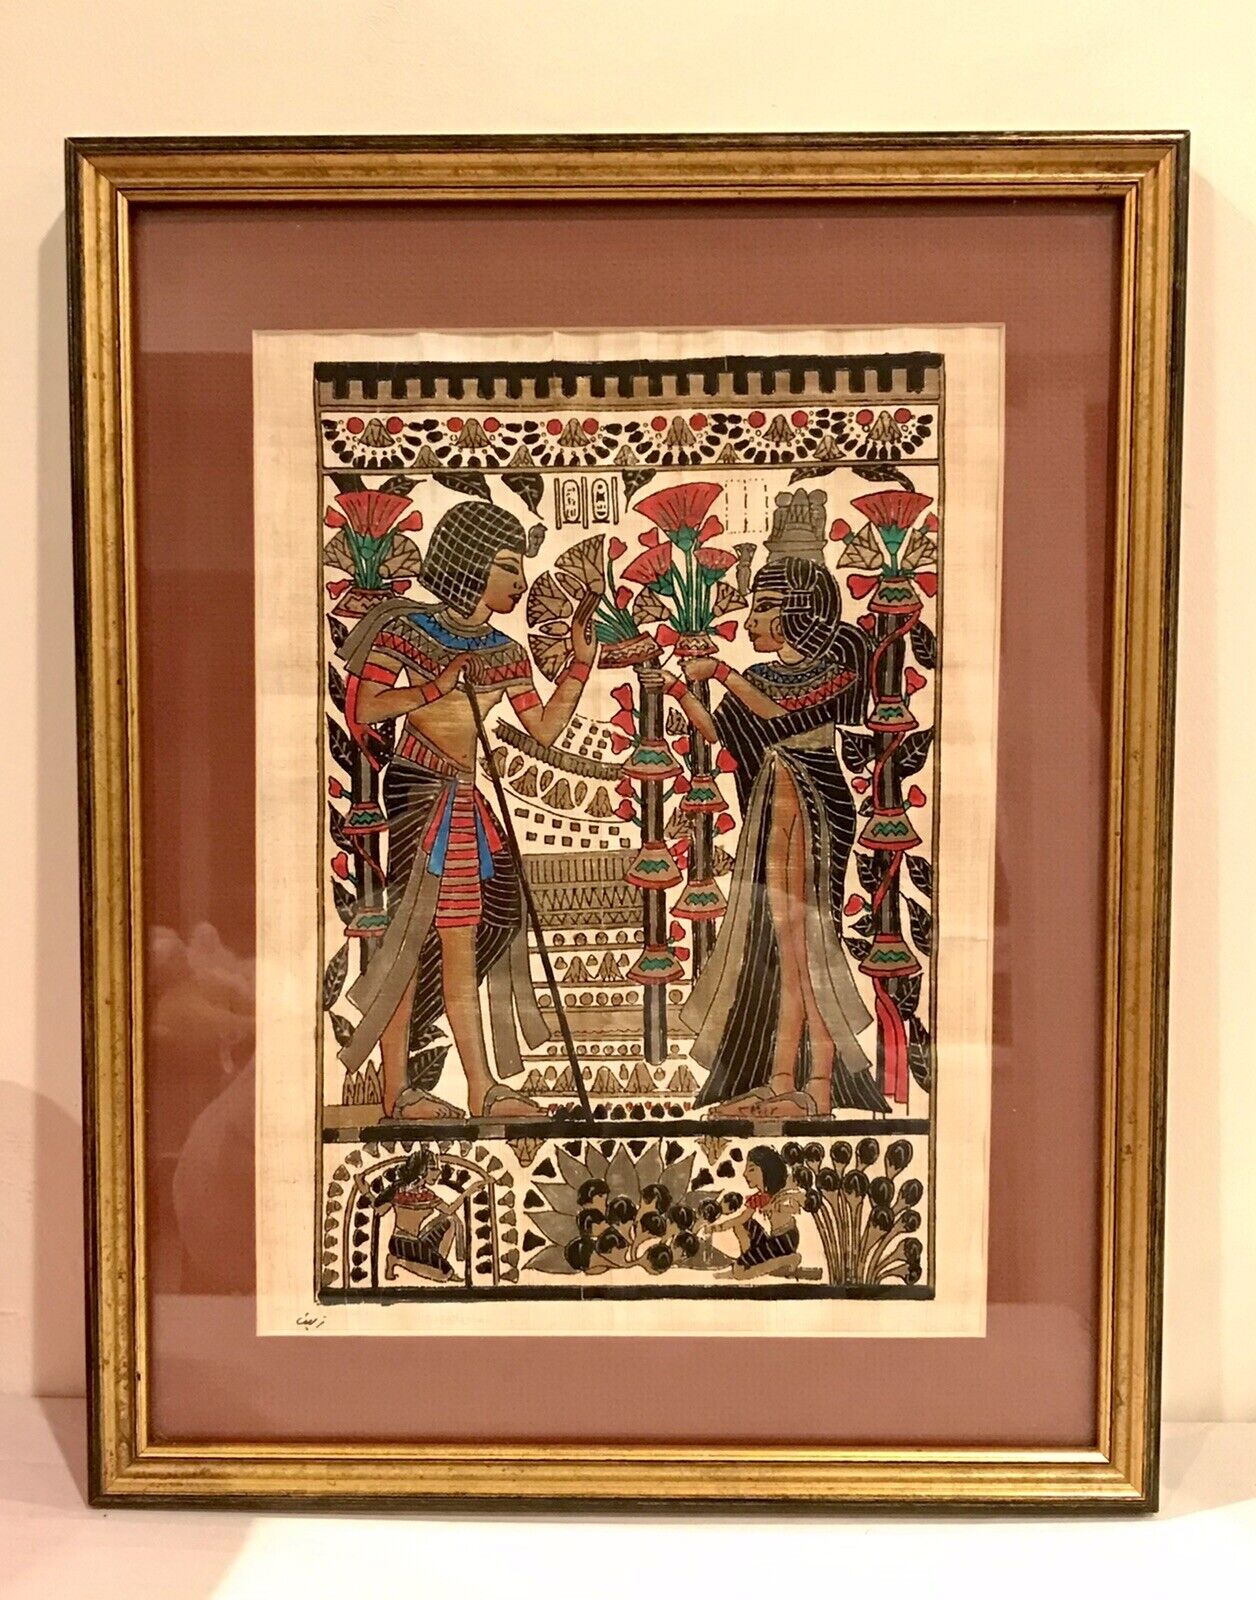 Framed Egyptian Papyrus Art of “King Tut on His Wedding Day”